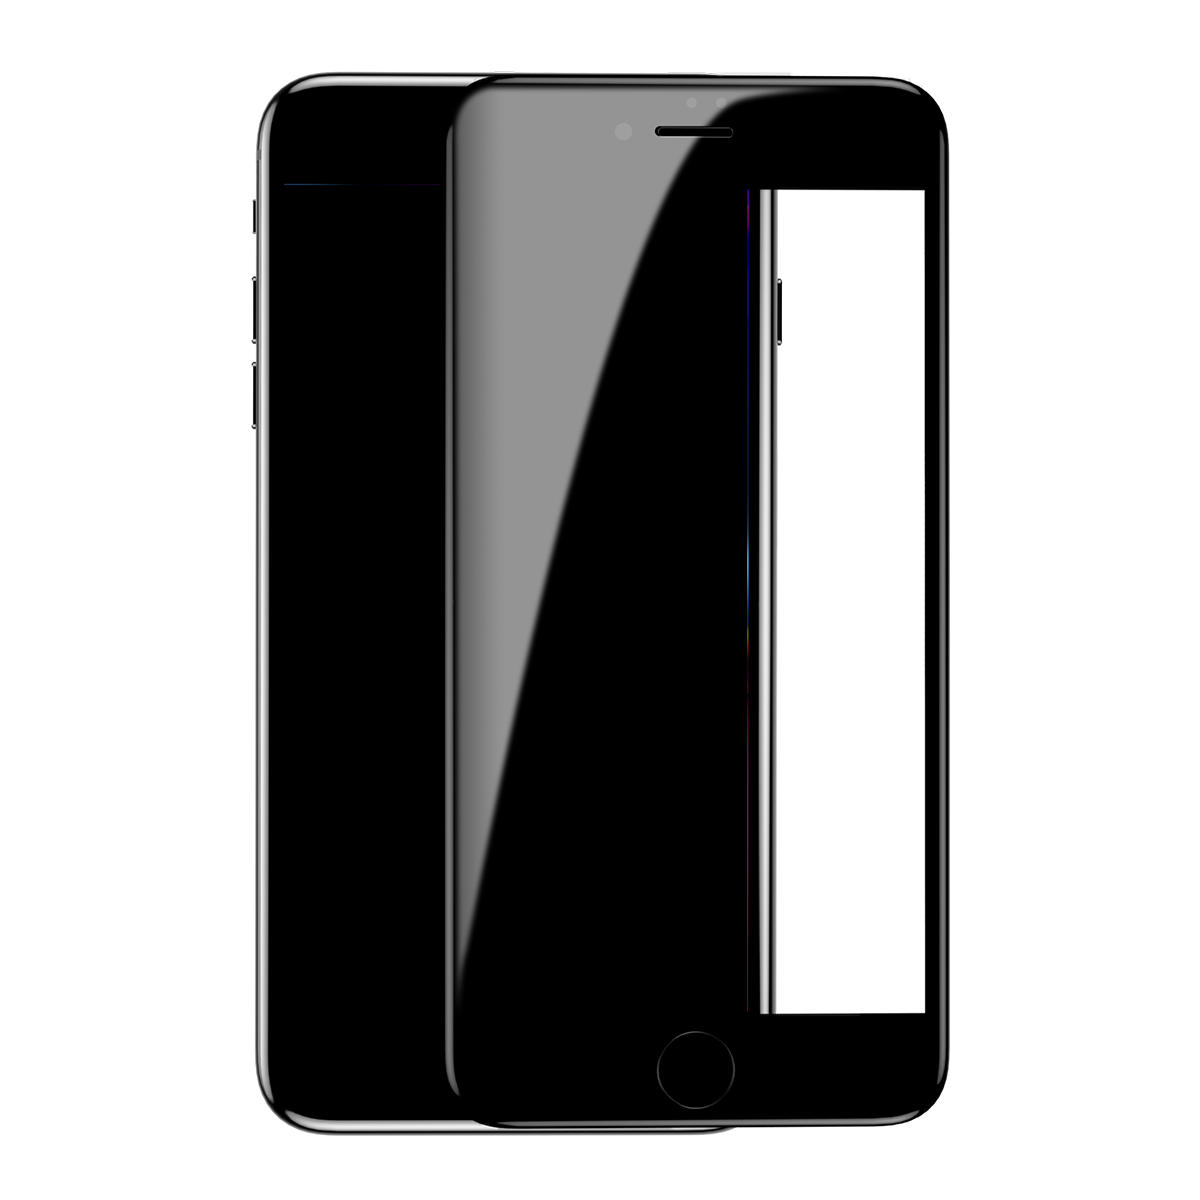 

Baseus True 7D Curved Edge Clear Explosion Proof Tempered Glass Screen Protector For iPhone 7 Plus/8 Plus